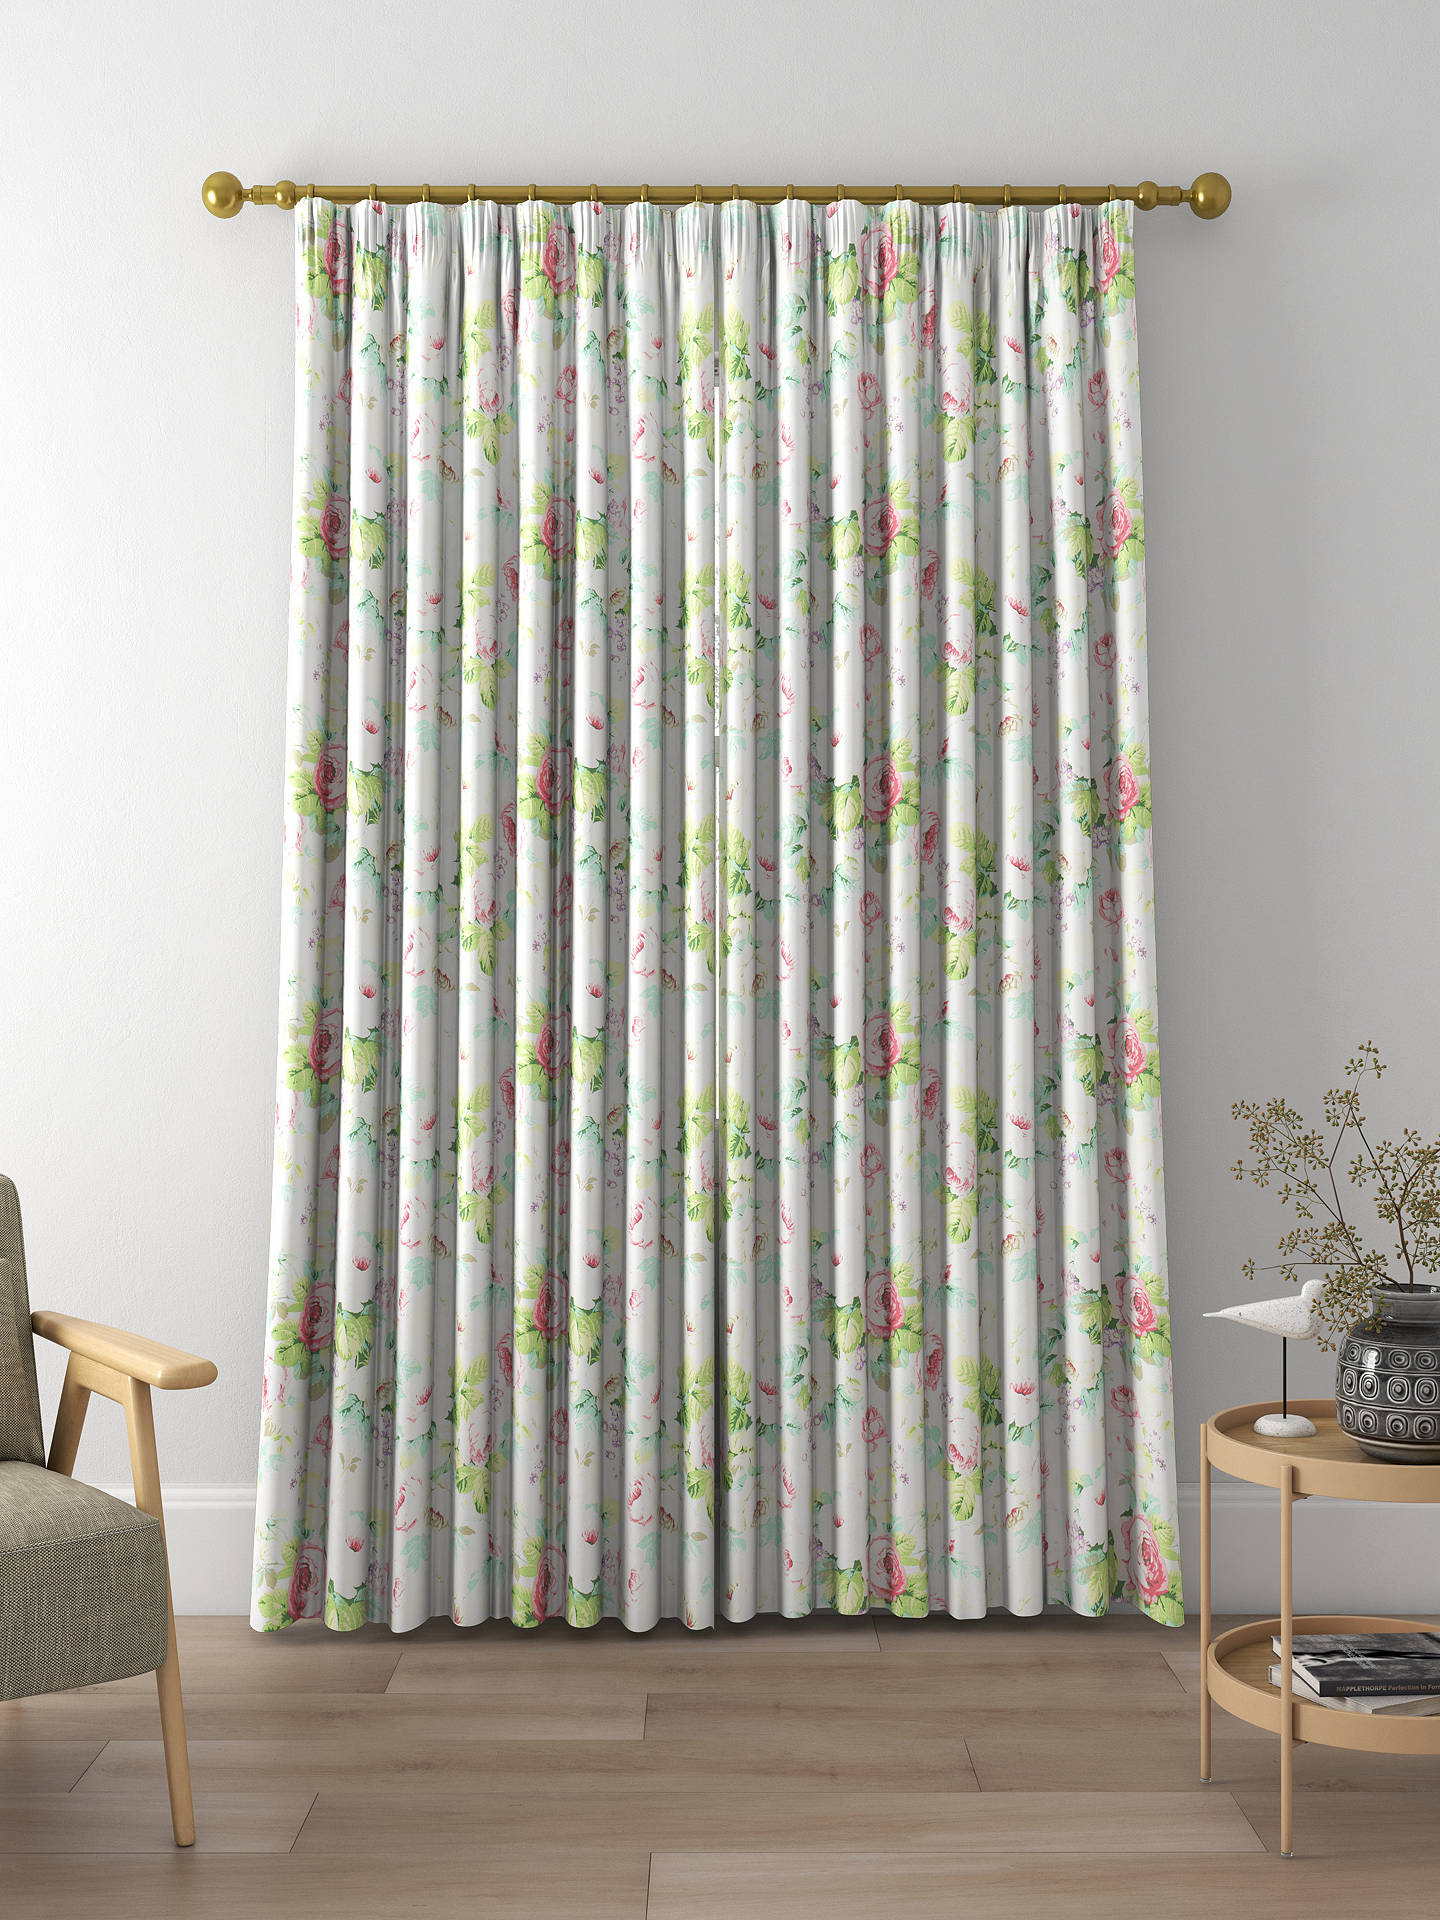 Sanderson Chelsea Made to Measure Curtains, Pink/Celadon